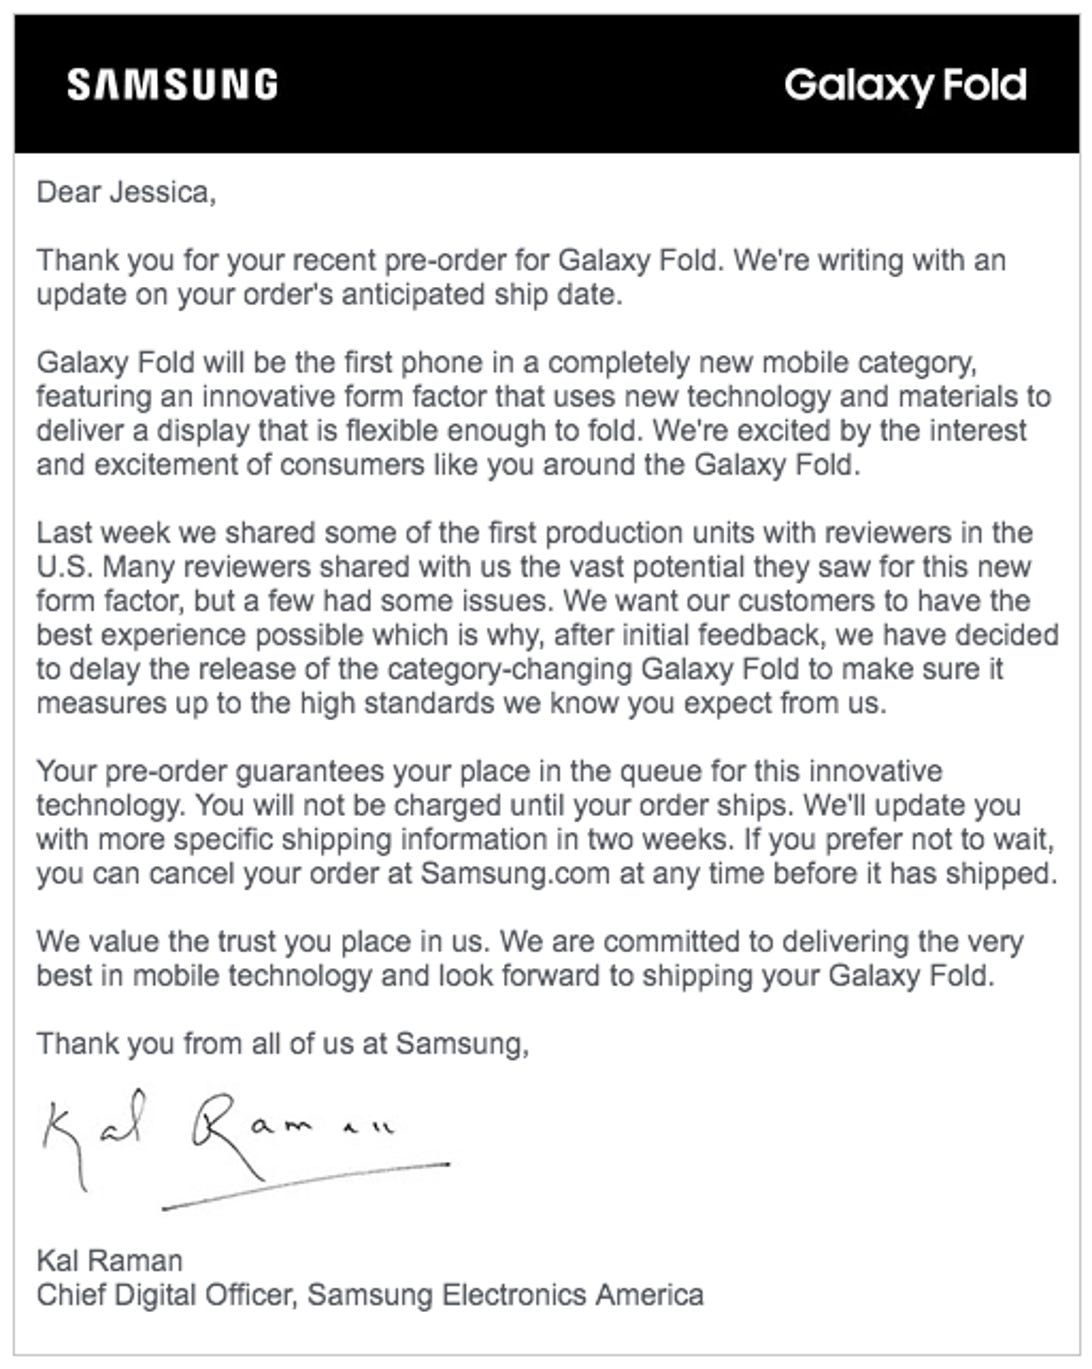 Galaxy Fold - Samsung email to preorder customers